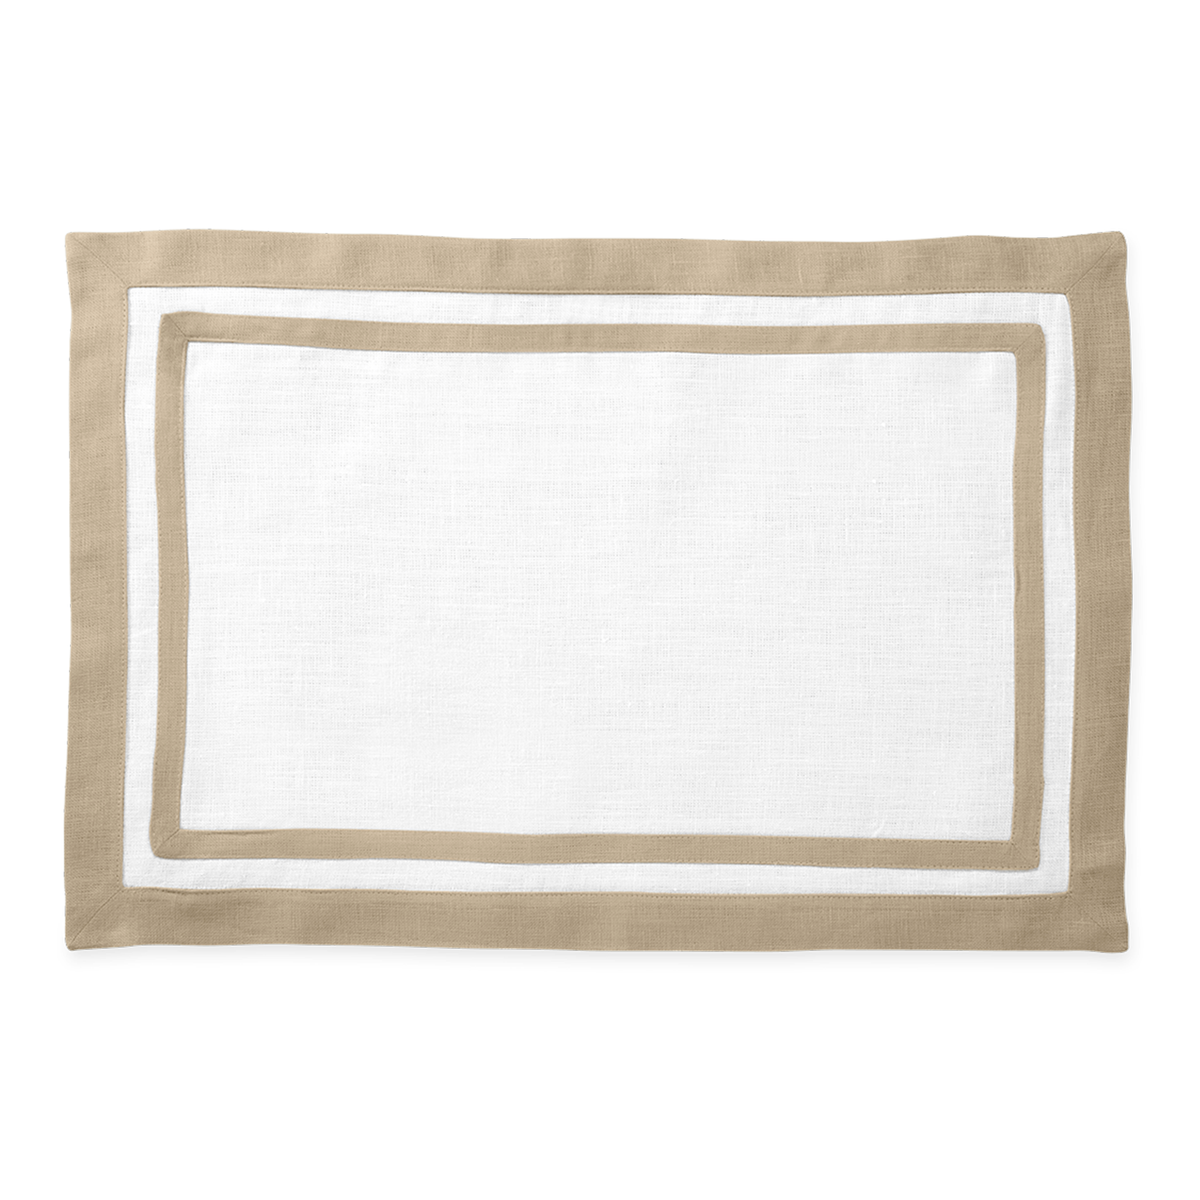 Silo Image of Matouk Double Border Rectangle Placemat in Color Oat